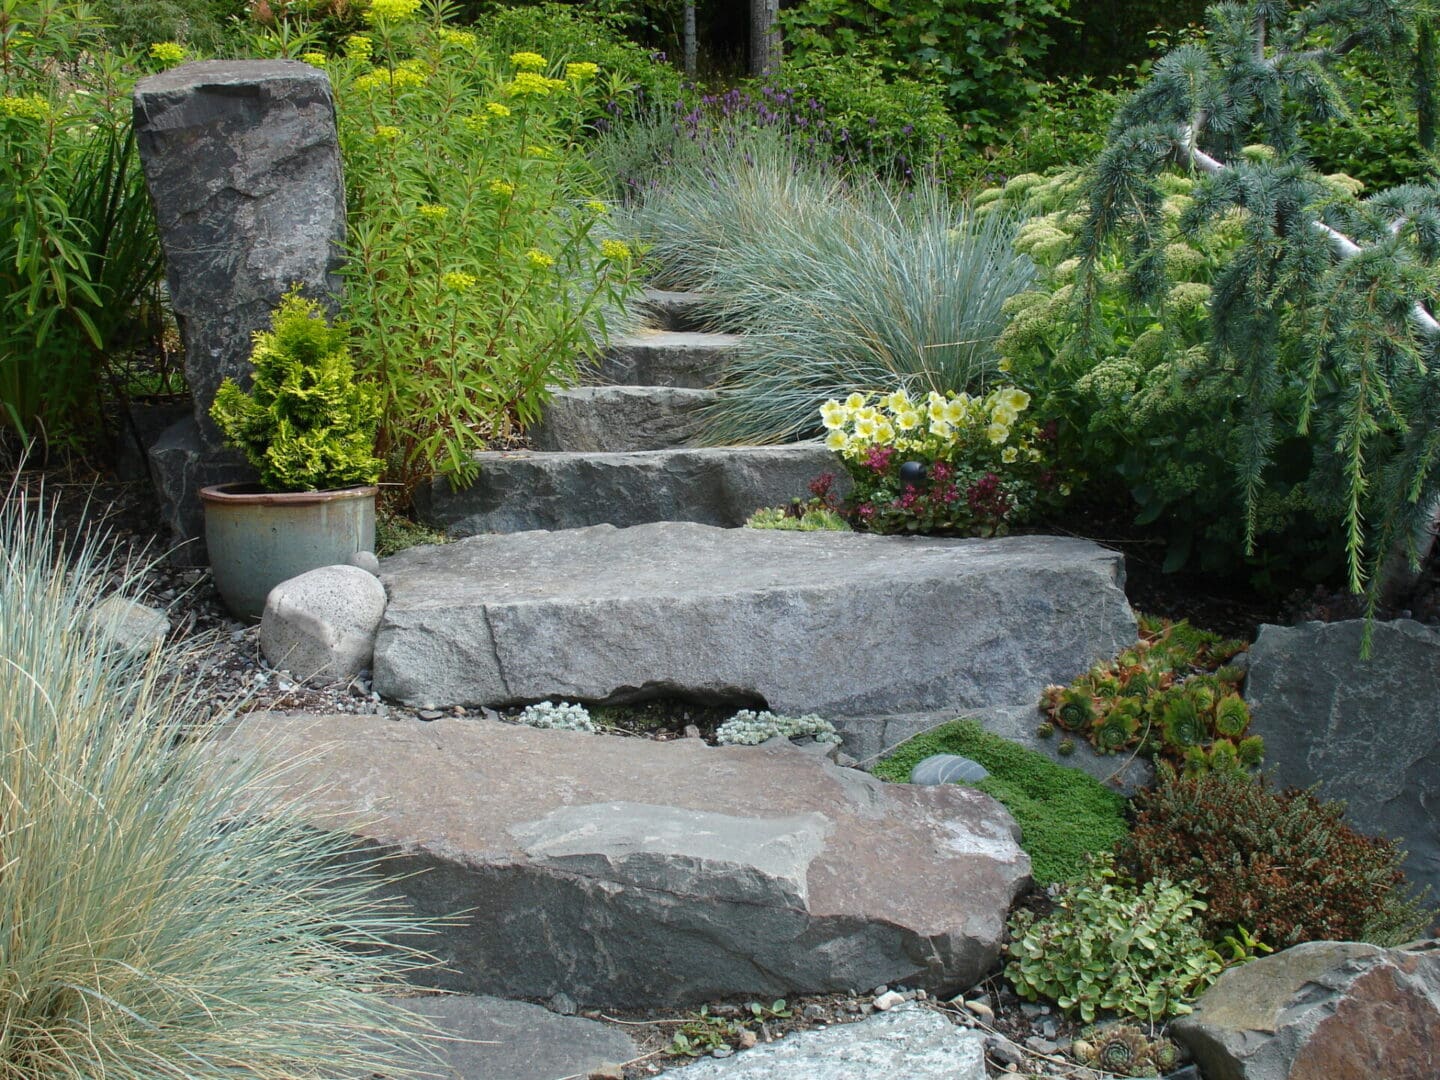 A garden with many plants and rocks